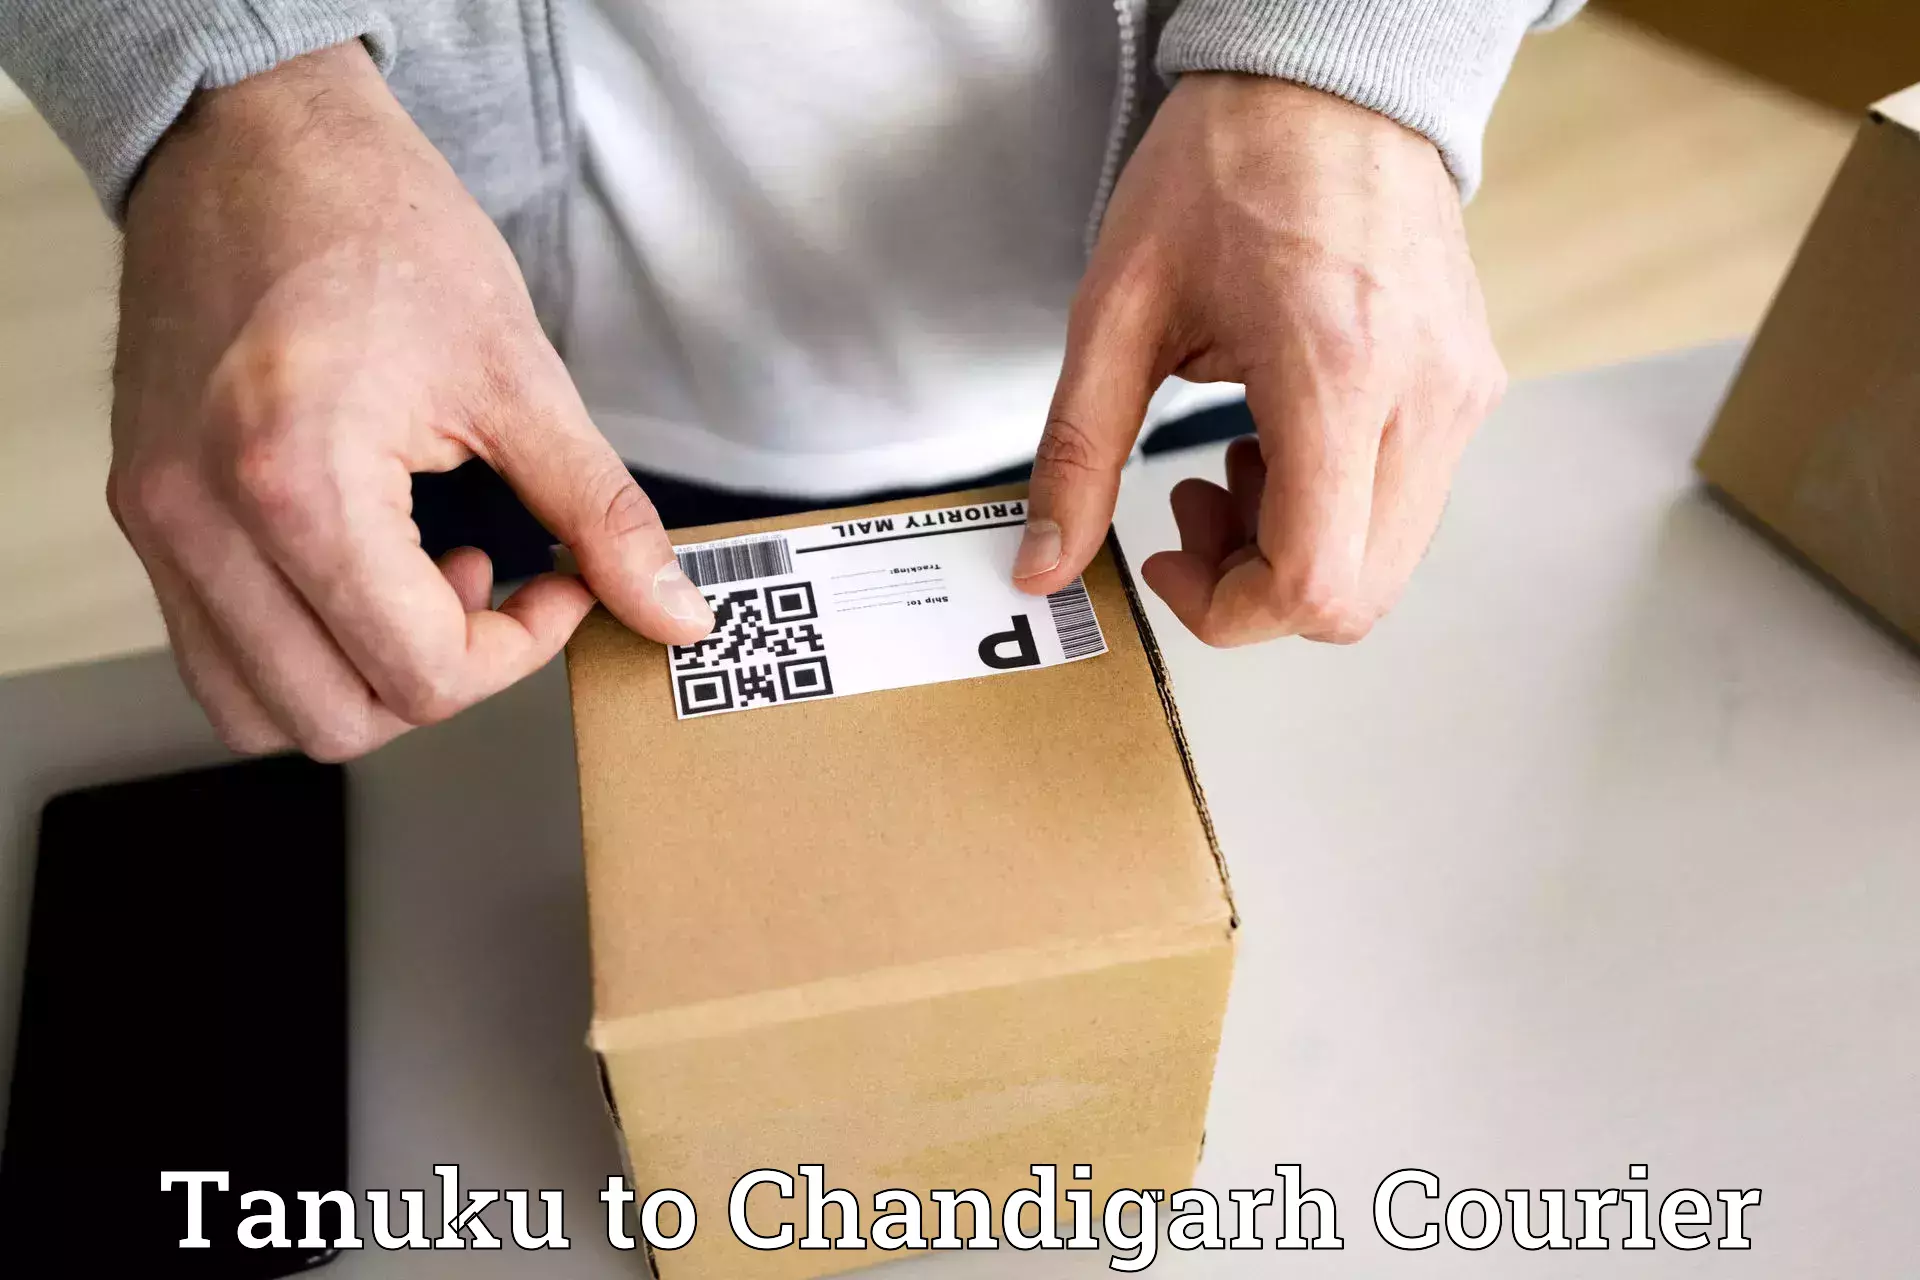 Local delivery service Tanuku to Chandigarh